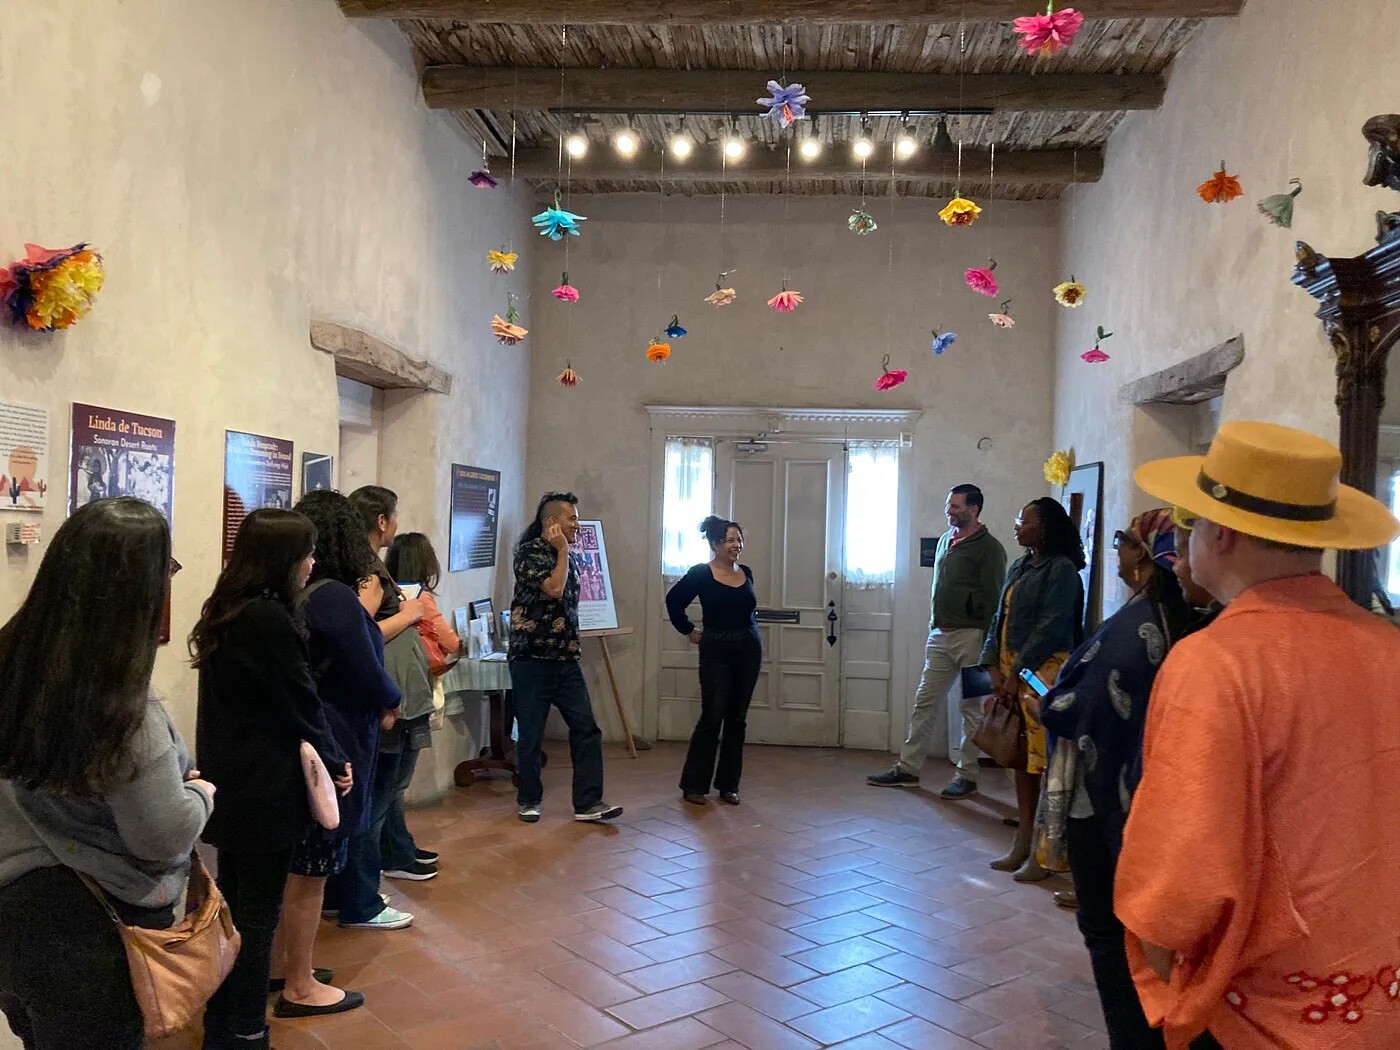 A group of people stand in a circle in a small room with colored objects hanging from the ceiling.